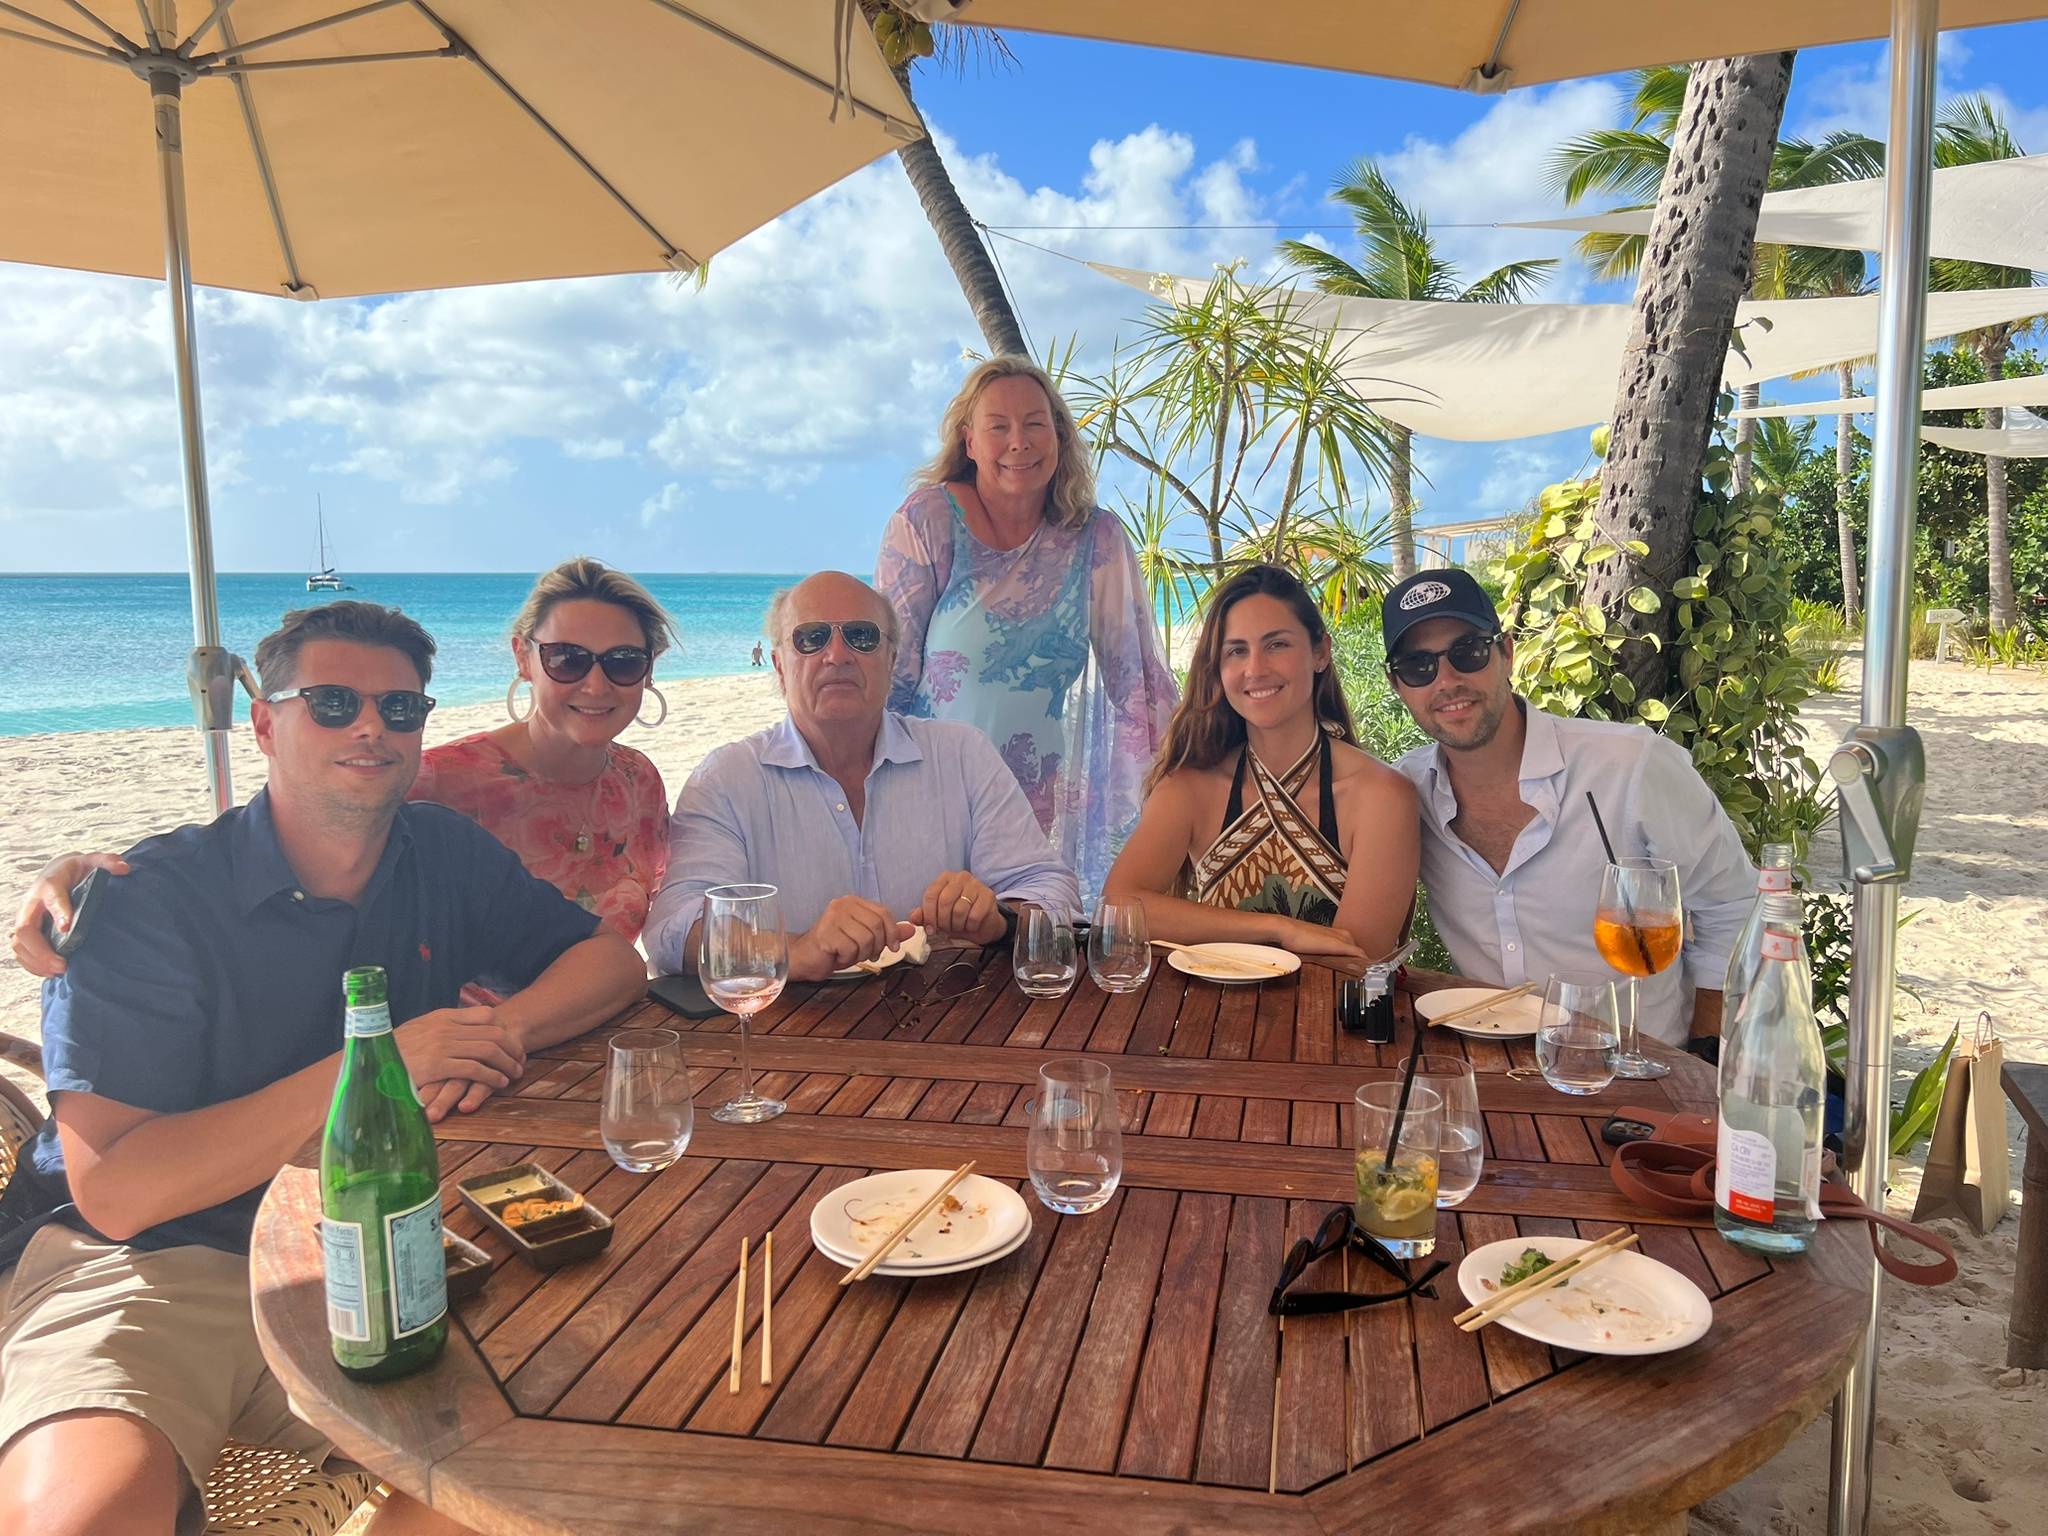 Ala and Ralph Isham and family at Nobu Restaurant on the island of Barbuda in the Caribbean wearing mesh printed toppers by Ala von Auersperg